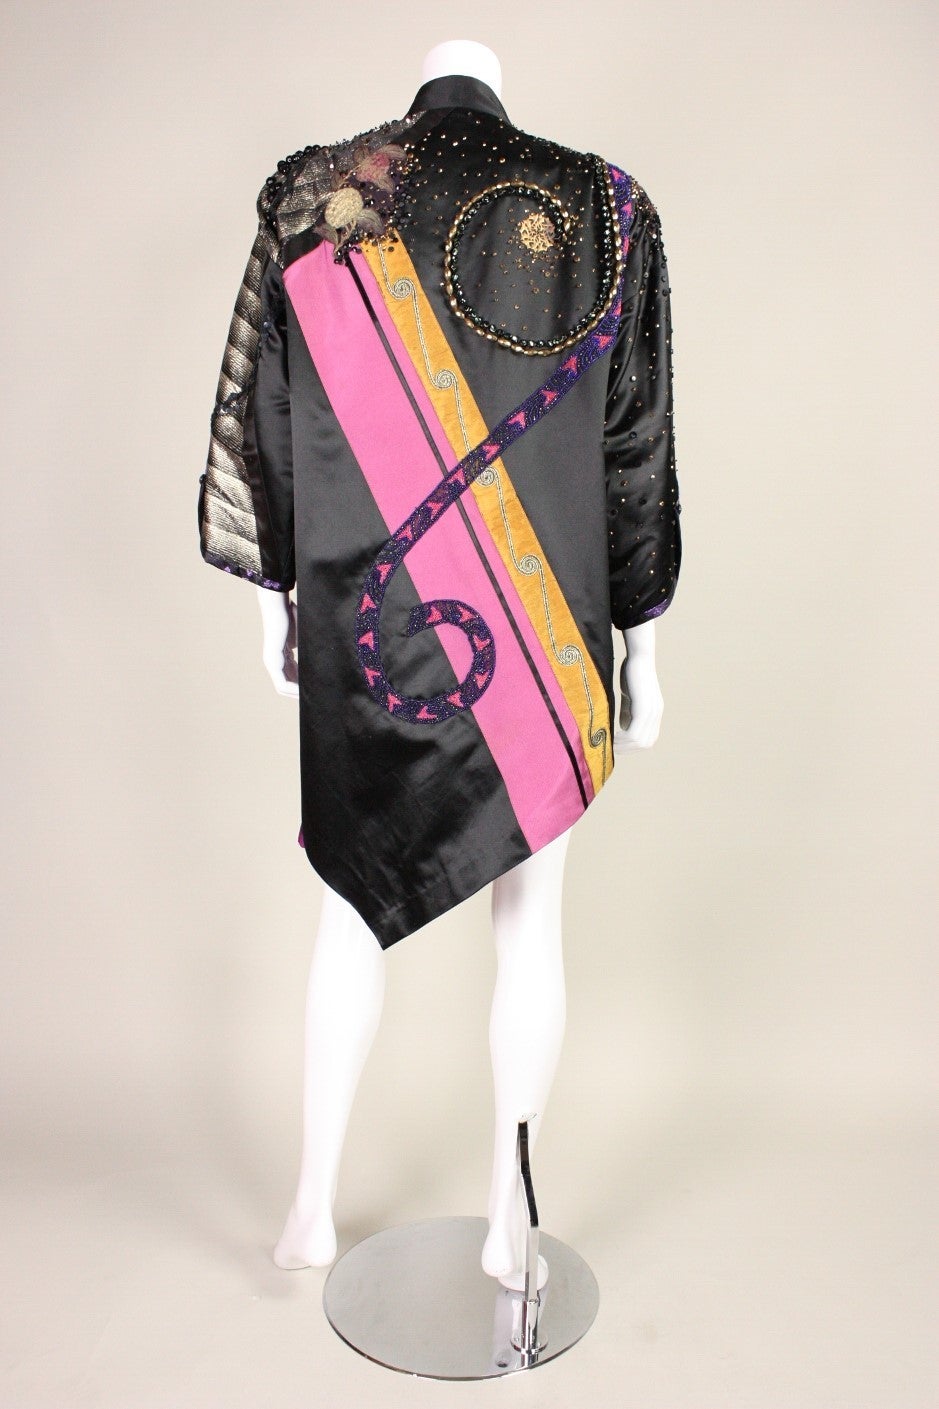 Women's 1980's Art to Wear Highly Embellished Coat